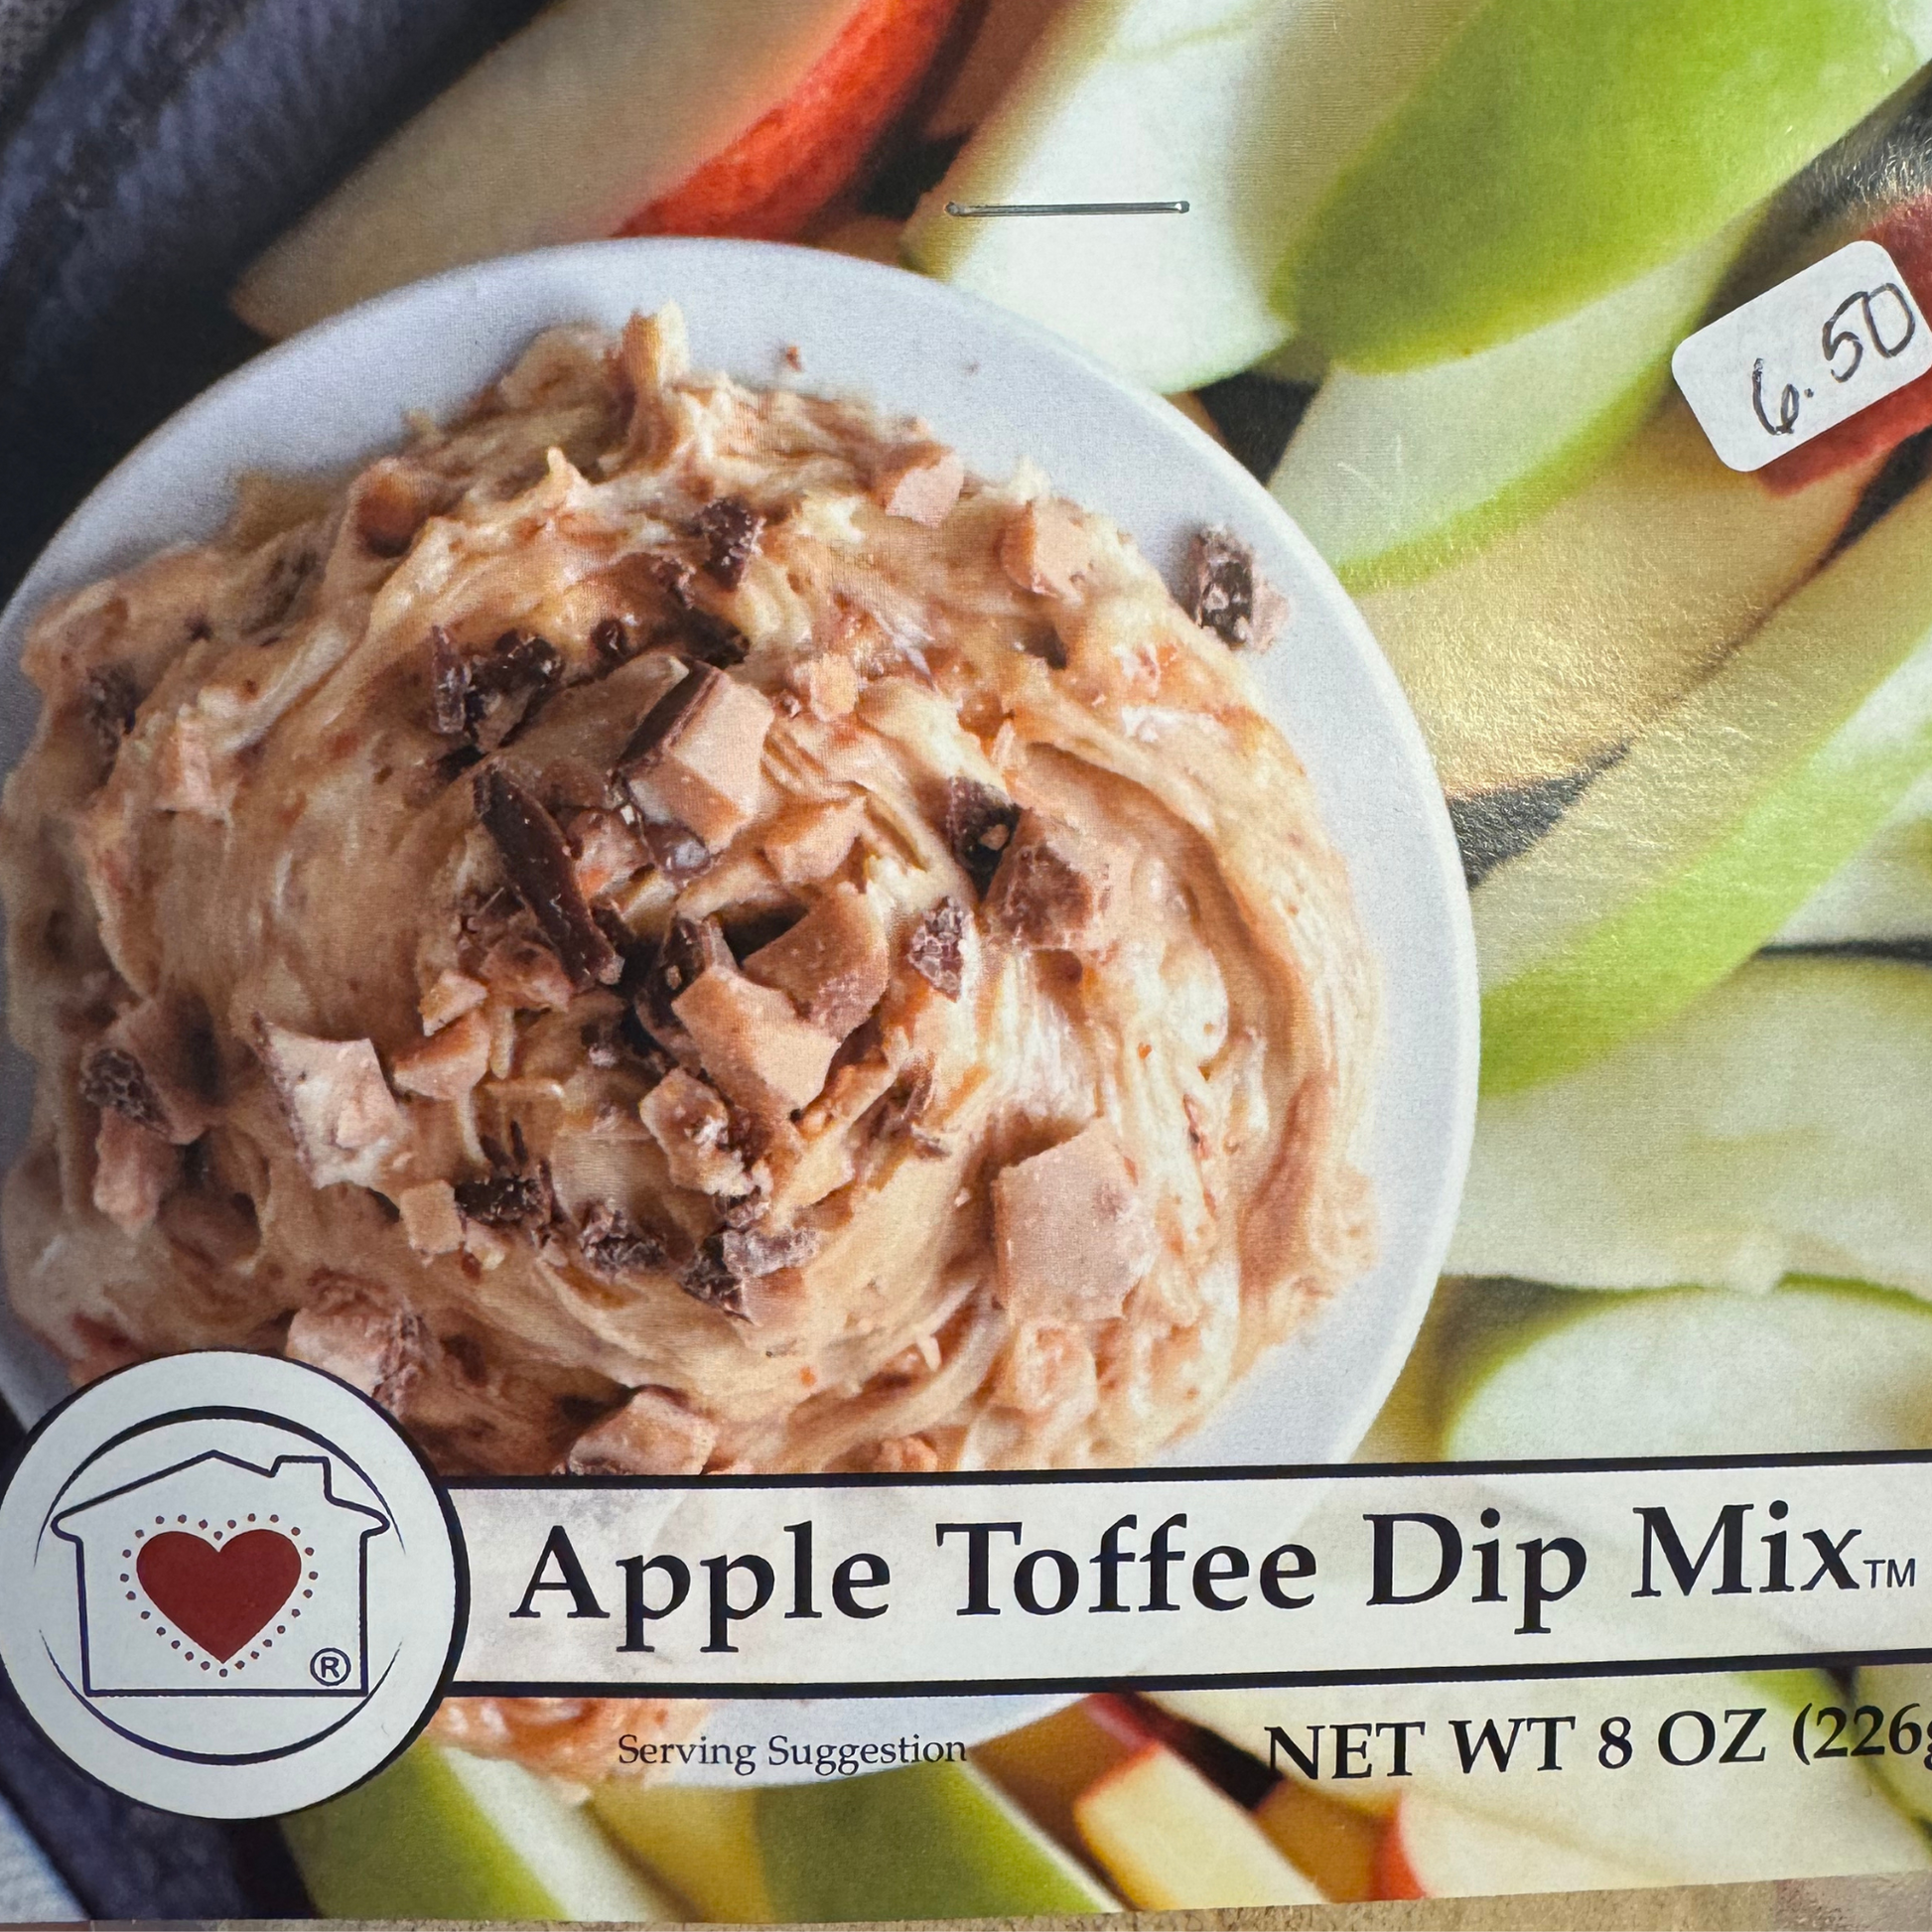 An absolutely delicious "sweet" dip for fruit. Just add water, cream cheese, and whip. It tastes great with any fruit: apples, bananas, strawberries, pineapple, grapes, and oranges. They can be fresh or frozen, canned or dried fruit. This dip makes a wonderful dessert and appetizer.